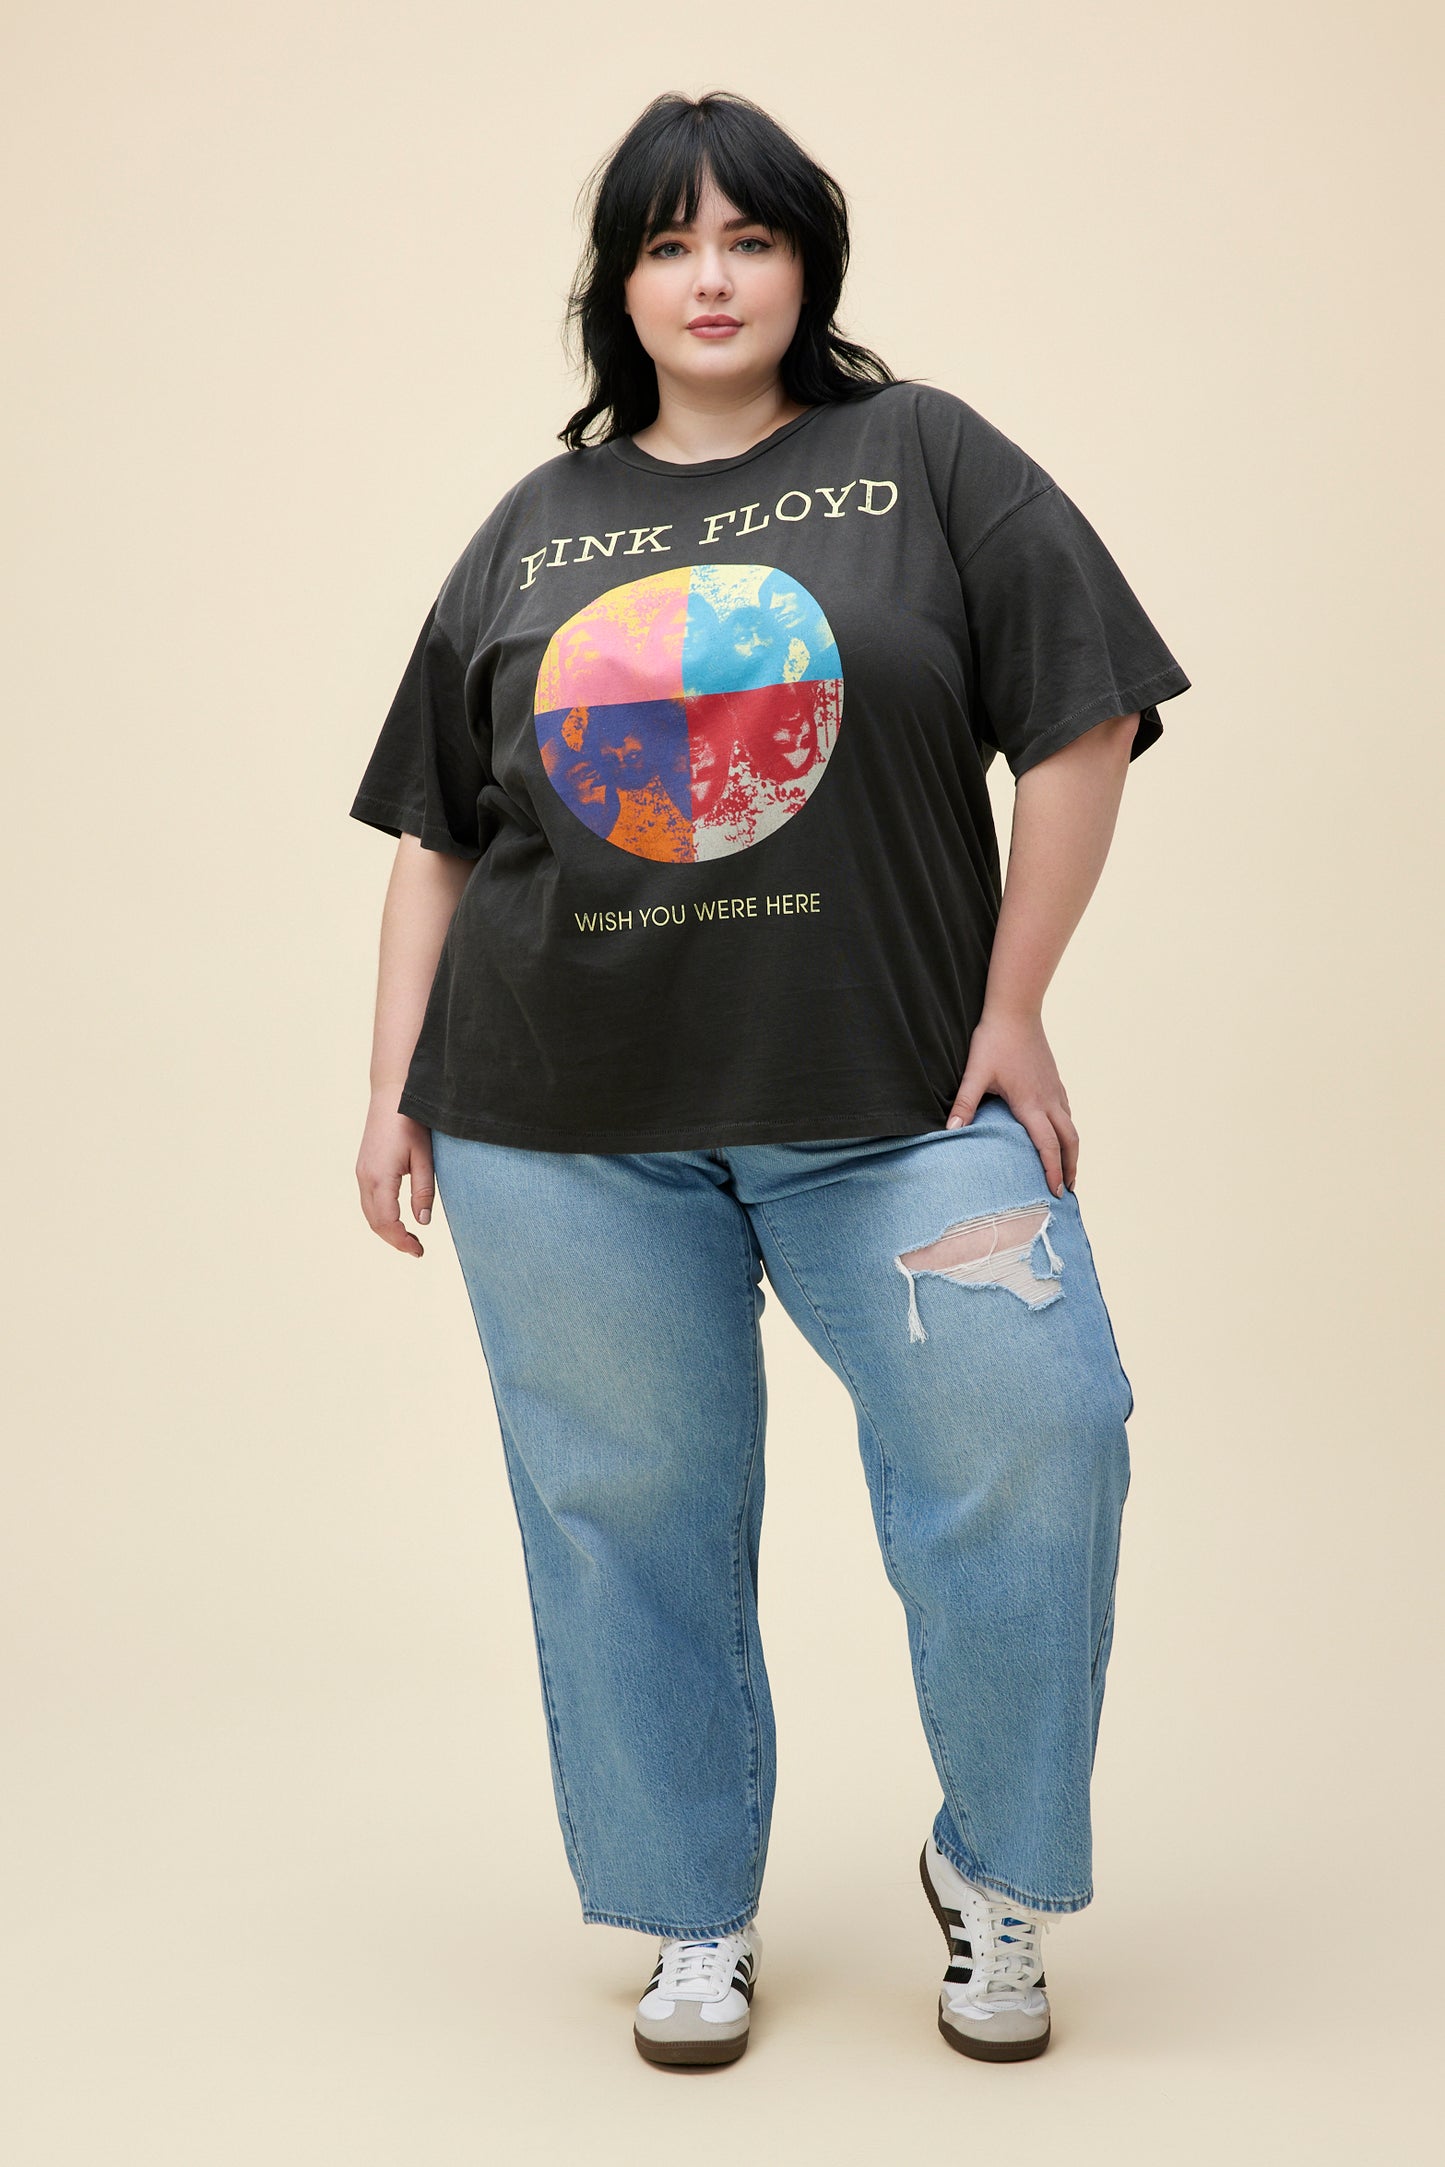 A model featuring a black tee ES designed with a distressed, multi-colored graphic image inspired by the main members of Pink Floyd stamped with "Wish you Were Here" below. 